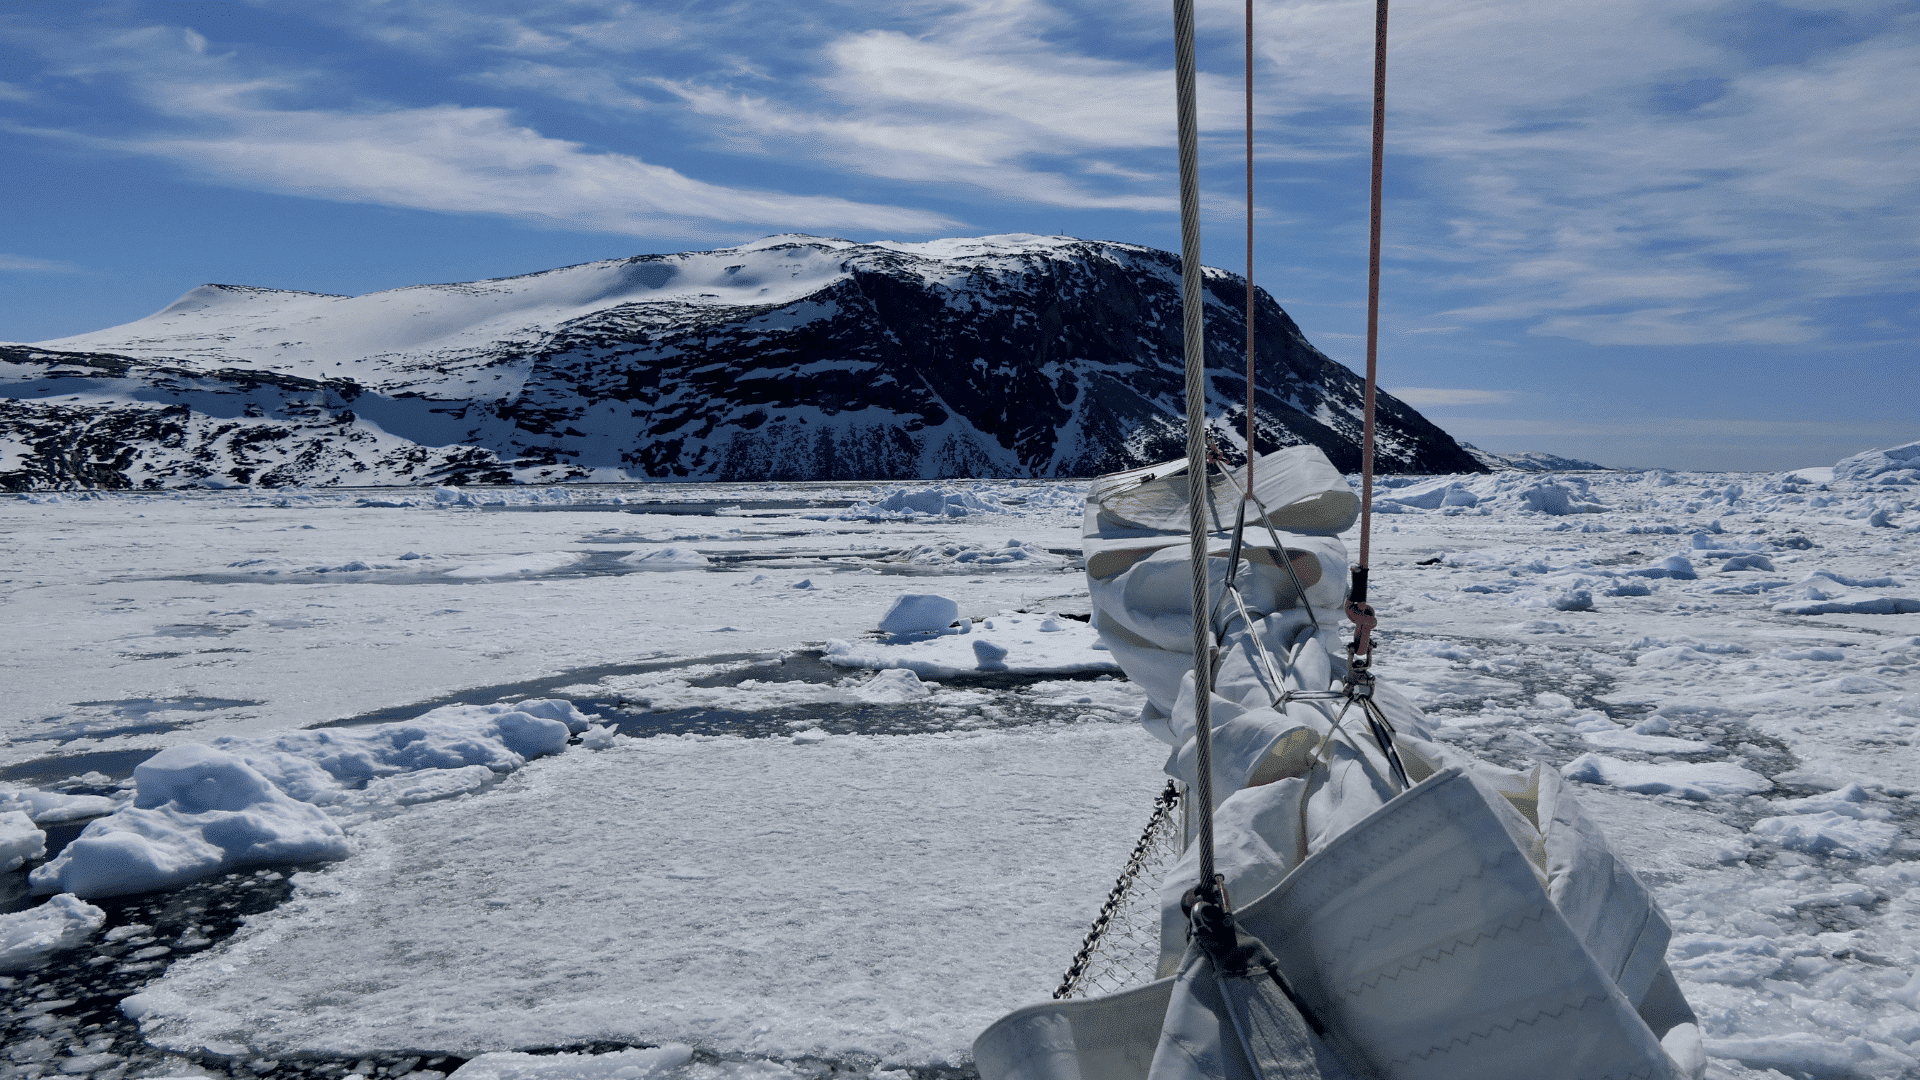 The bow of a boat as it cuts through water covered in snowy ice. Rocky land looms in the distance.